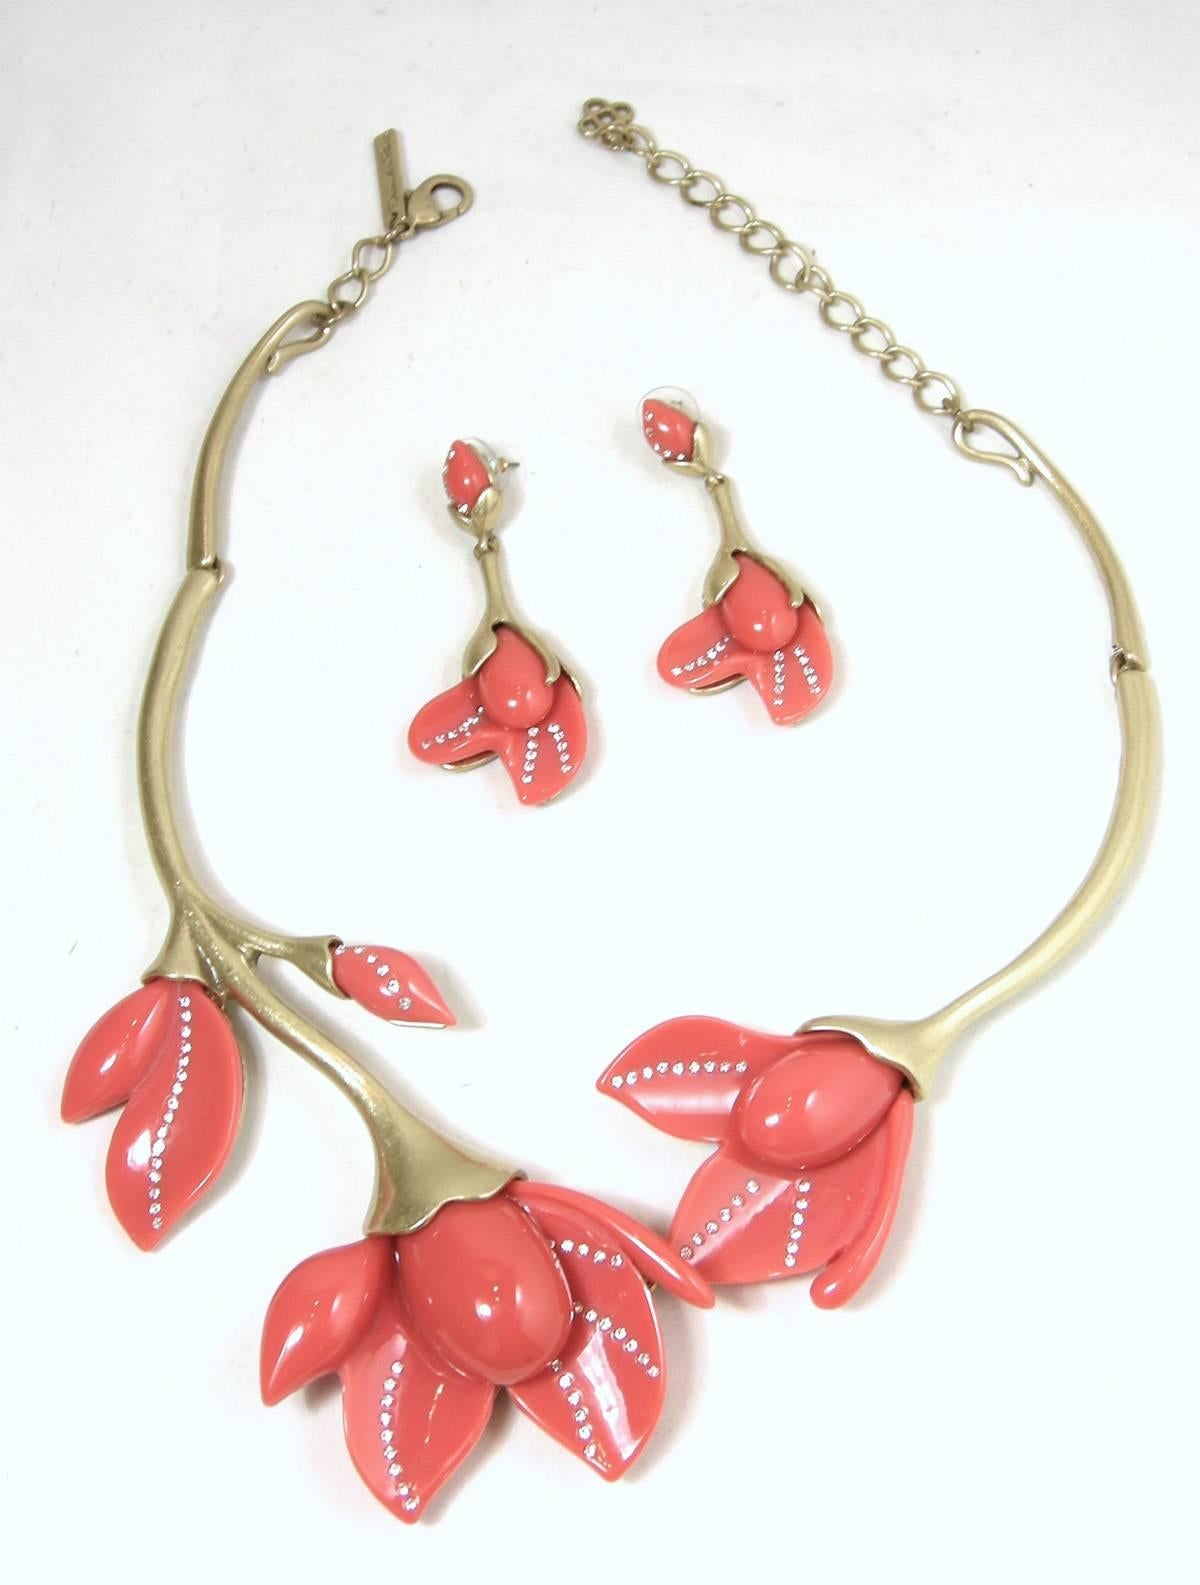 This vintage signed Oscar de la Renta necklace features pink Lucite orchids with clear rhinestone accents in a gold-tone metal setting.  This necklace measures 20” long with a spring closure x 2-1/2” wide at the centerpiece. The necklace is signed